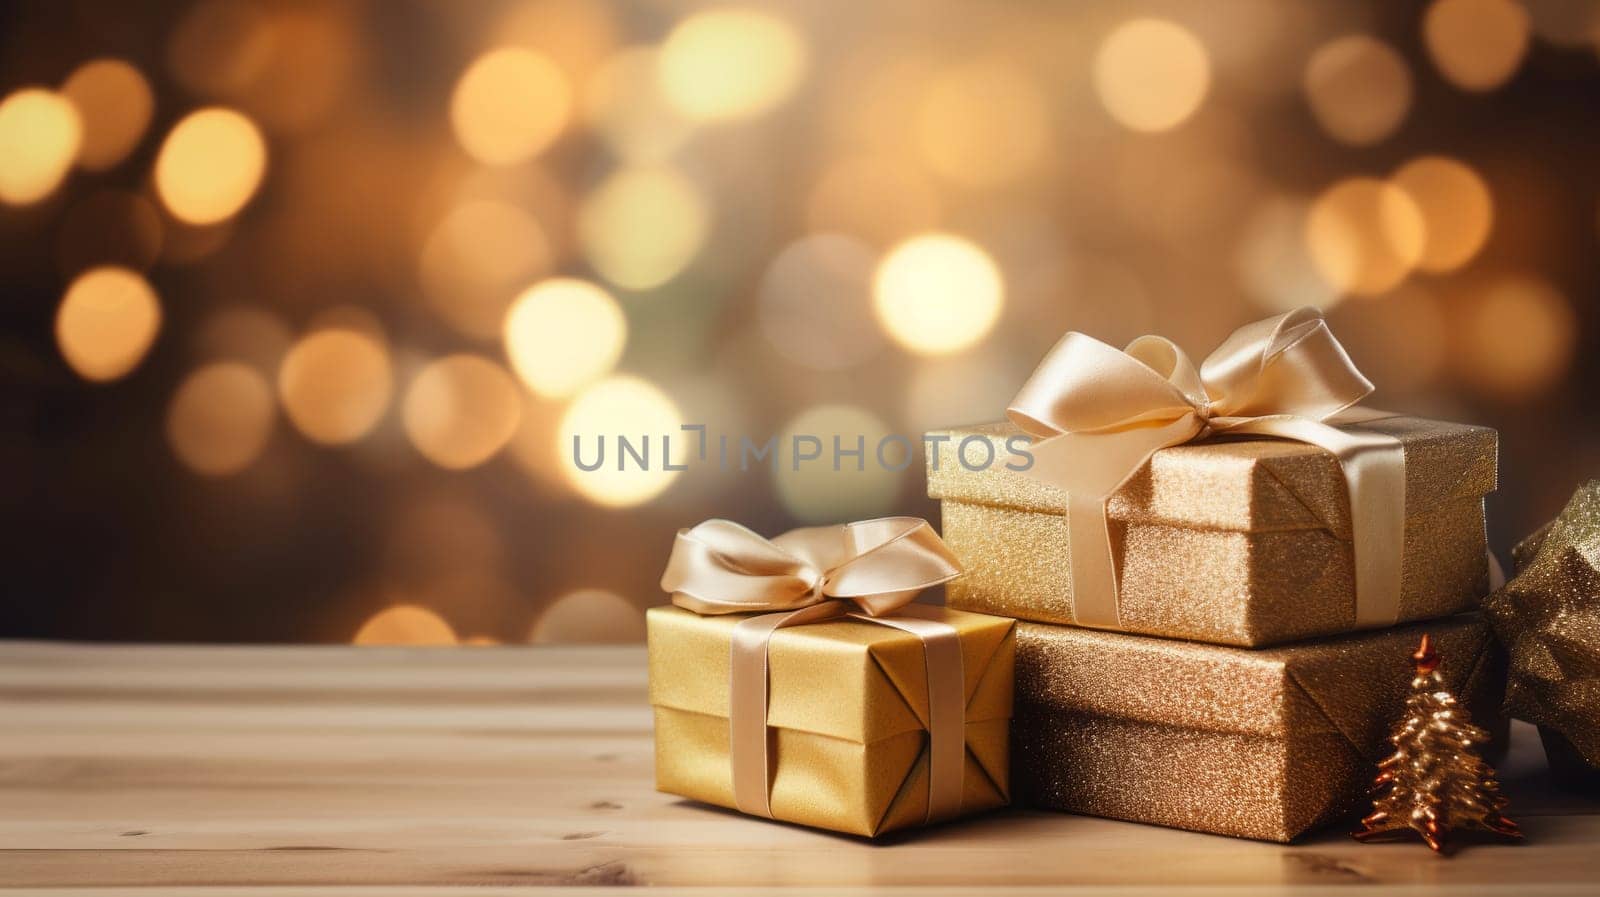 A stack of Christmas presents with gold ribbons on a wooden table with a blurred background of lights. The concept is Christmas and gift giving. by DogDrawHand